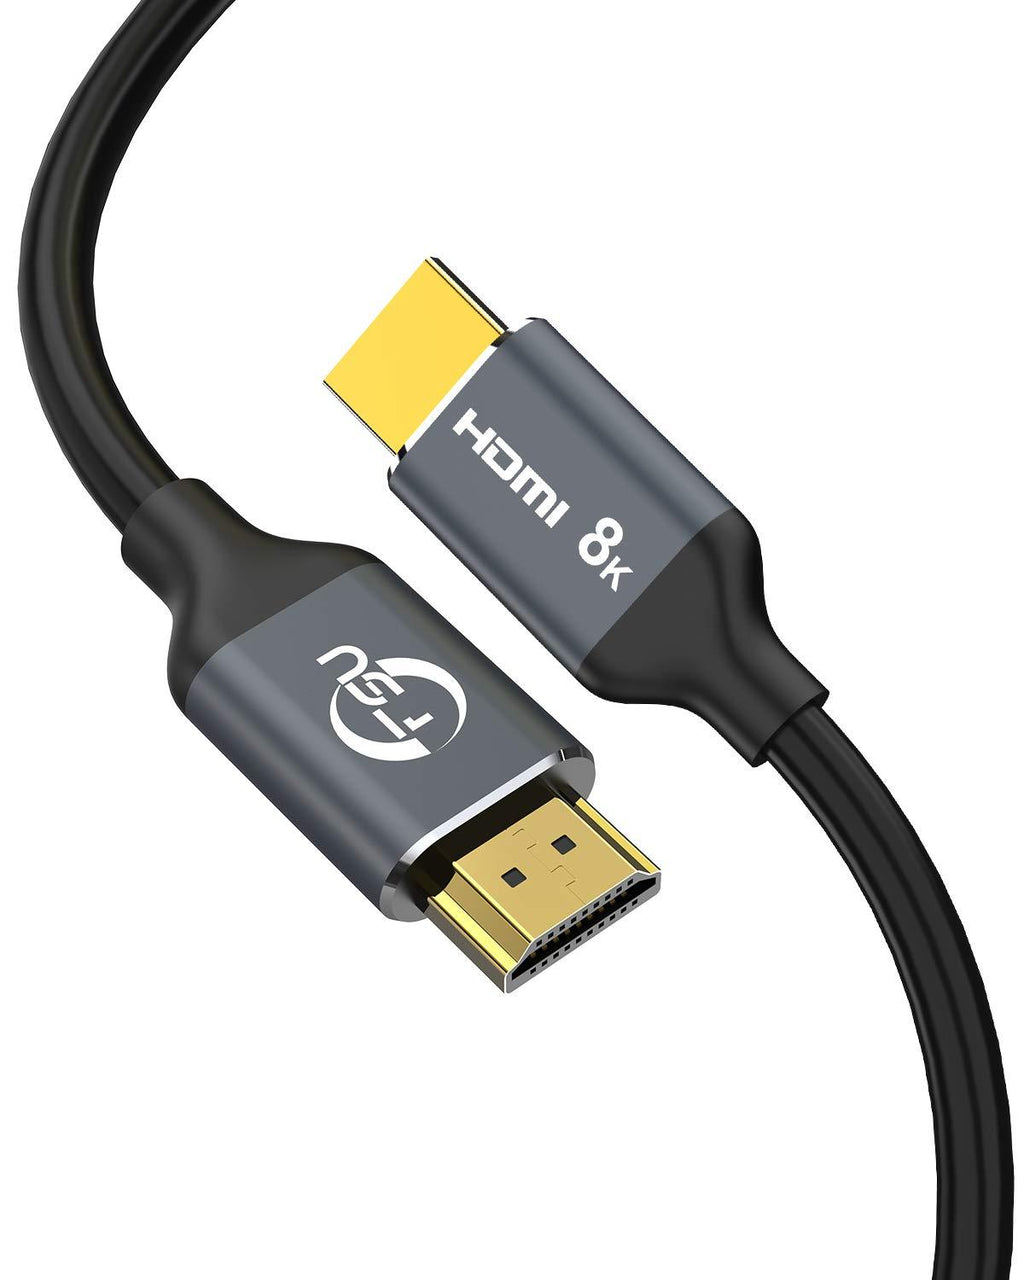 8K HDMI 2.1 Cable 15FT,Ultra High Speed 8K@60HZ 4K@120Hz 48Gbps Ultra HD HDMI to HDMI Cord, Support Dynamic HDR, eARC, Dolby Atmos,Compatible with Roku,Laptop,Monitor,PS4,PS5,Apple TV,Xbox&More 8K/15FT